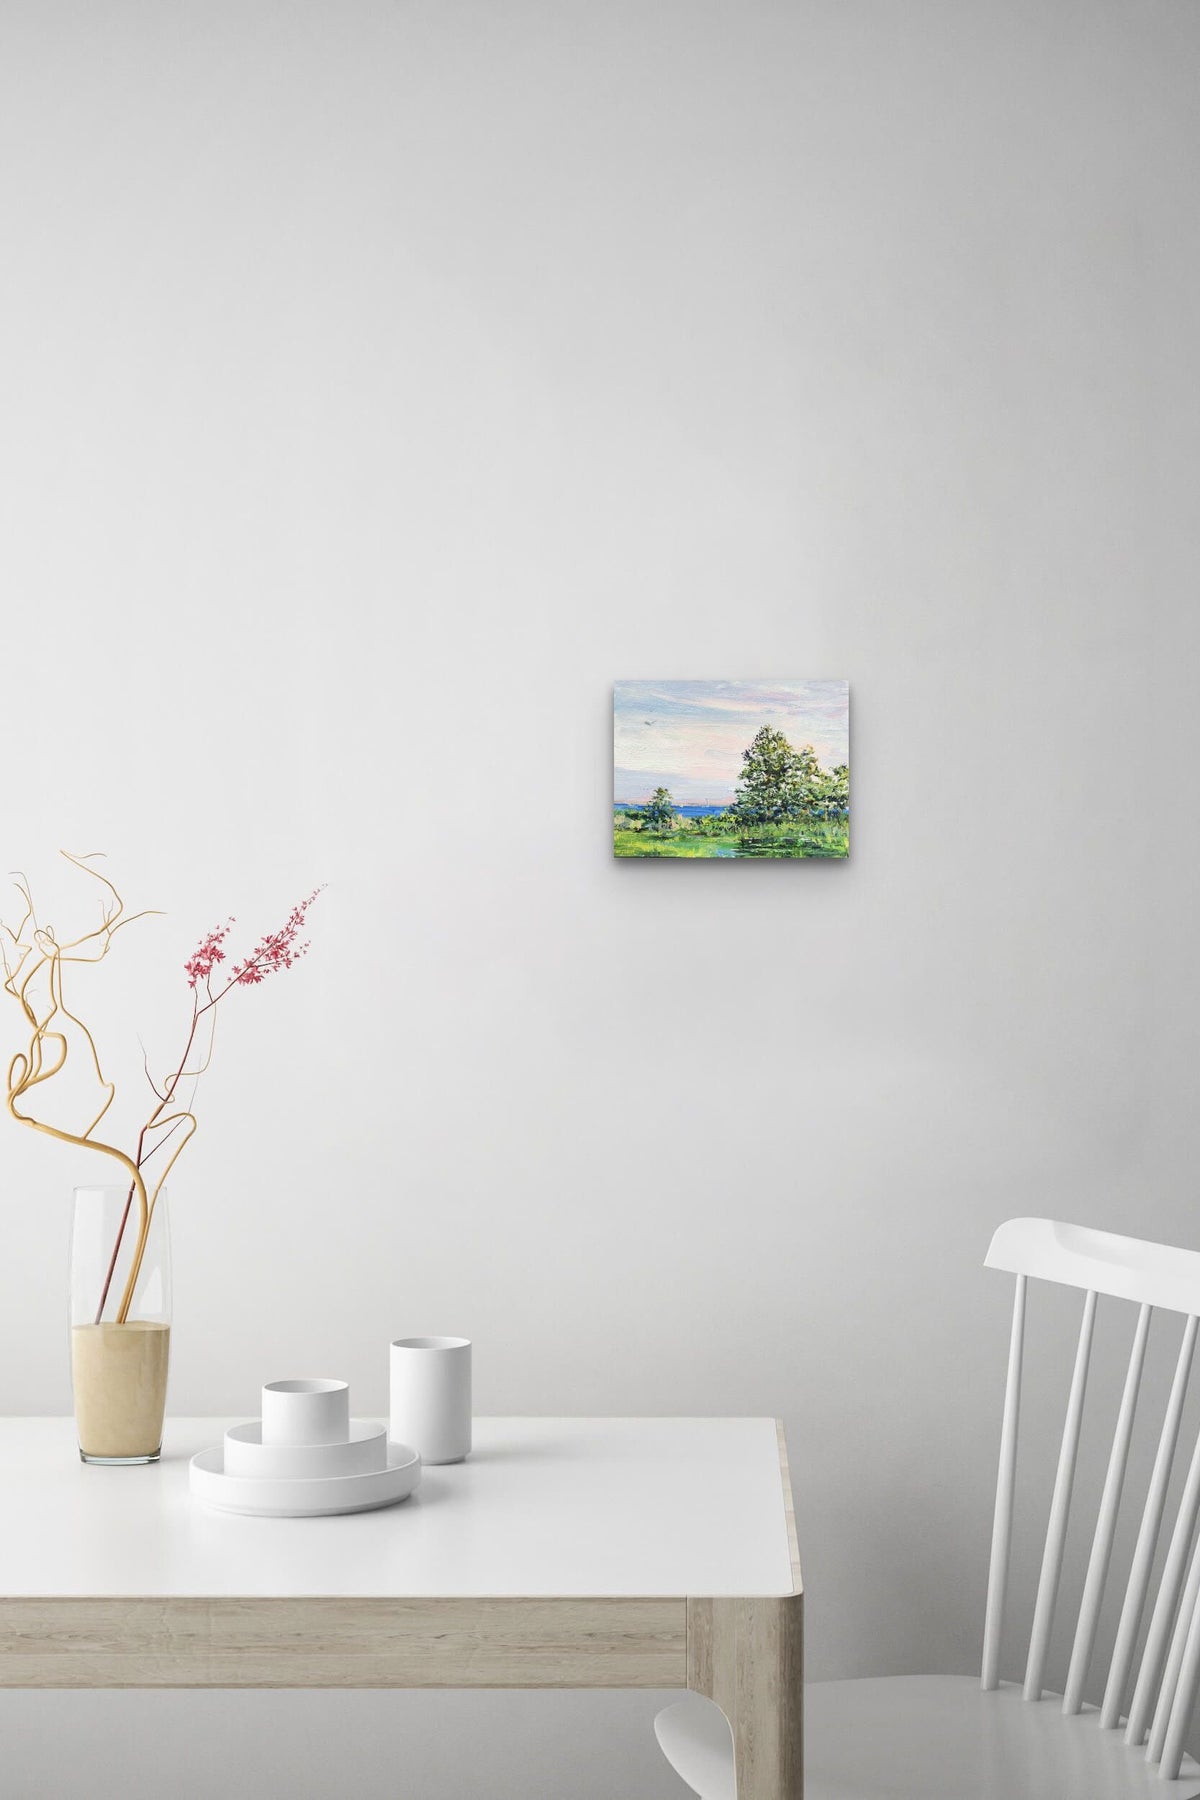 Small Scale New England Landscape Painting adds a soft beauty & nature to this kitchen